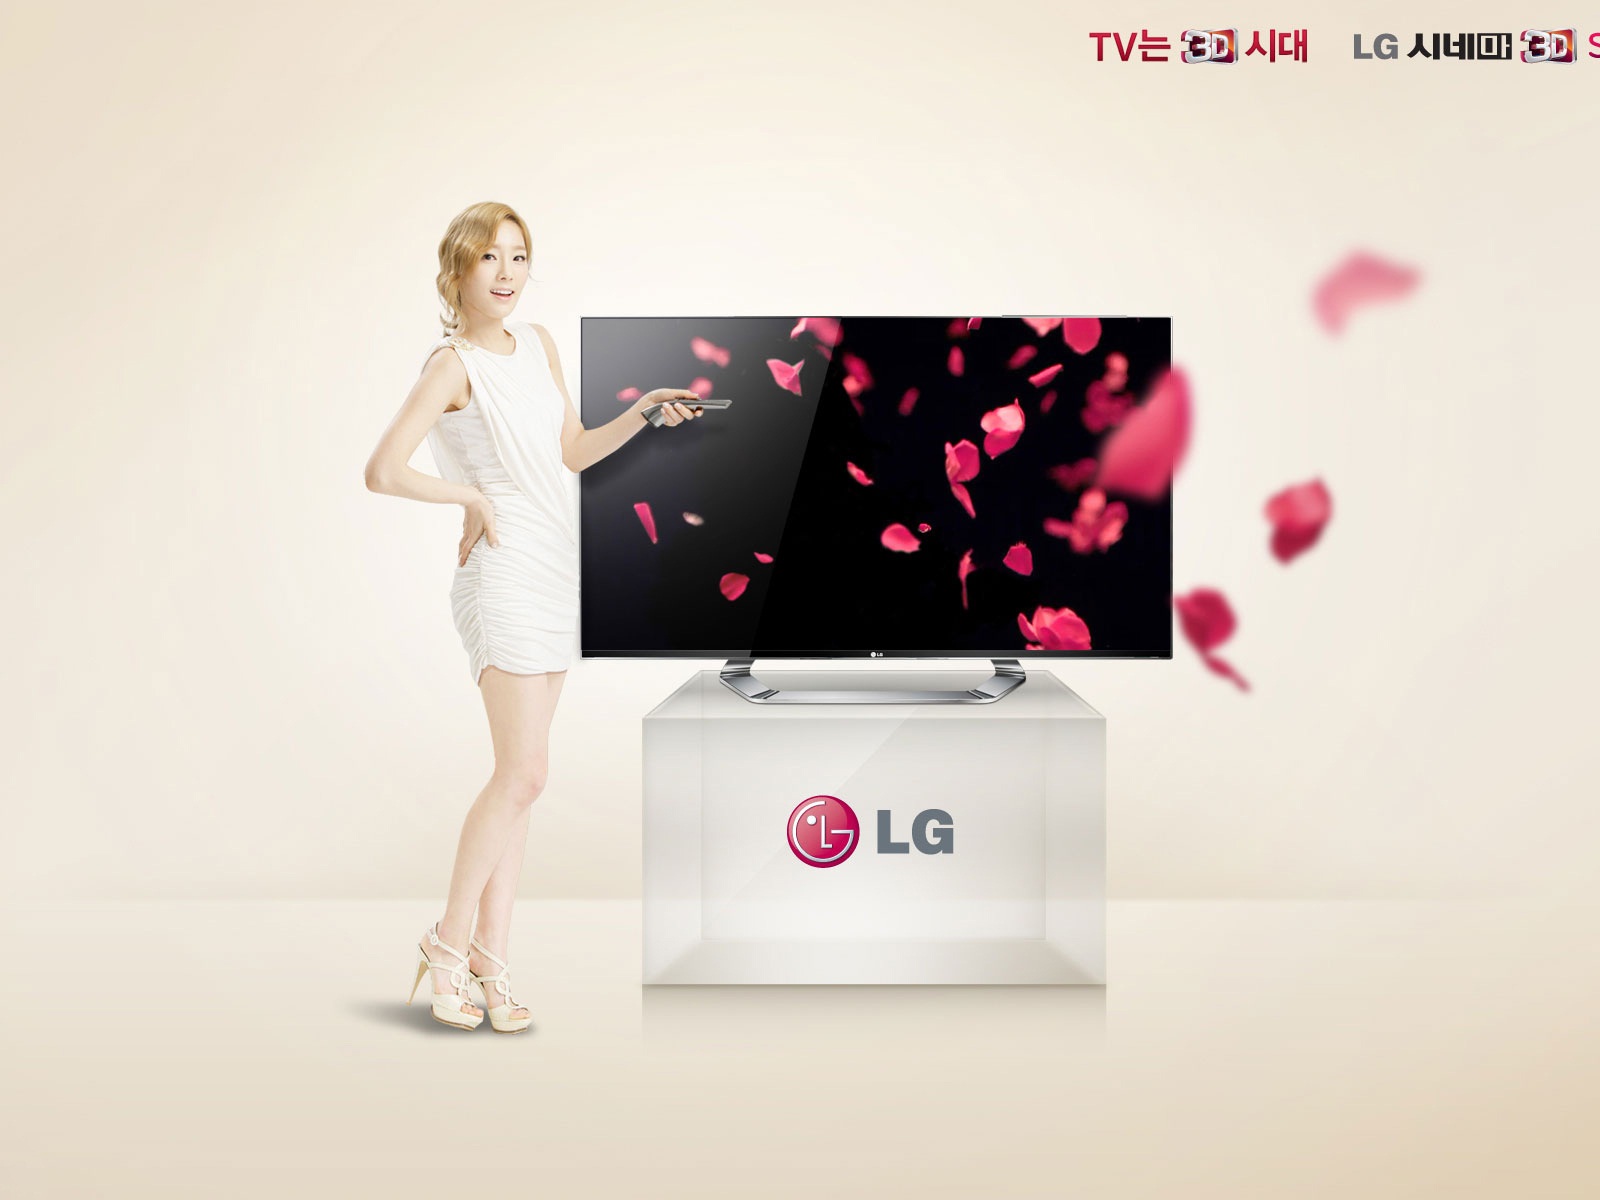 Girls Generation ACE and LG endorsements ads HD wallpapers #14 - 1600x1200